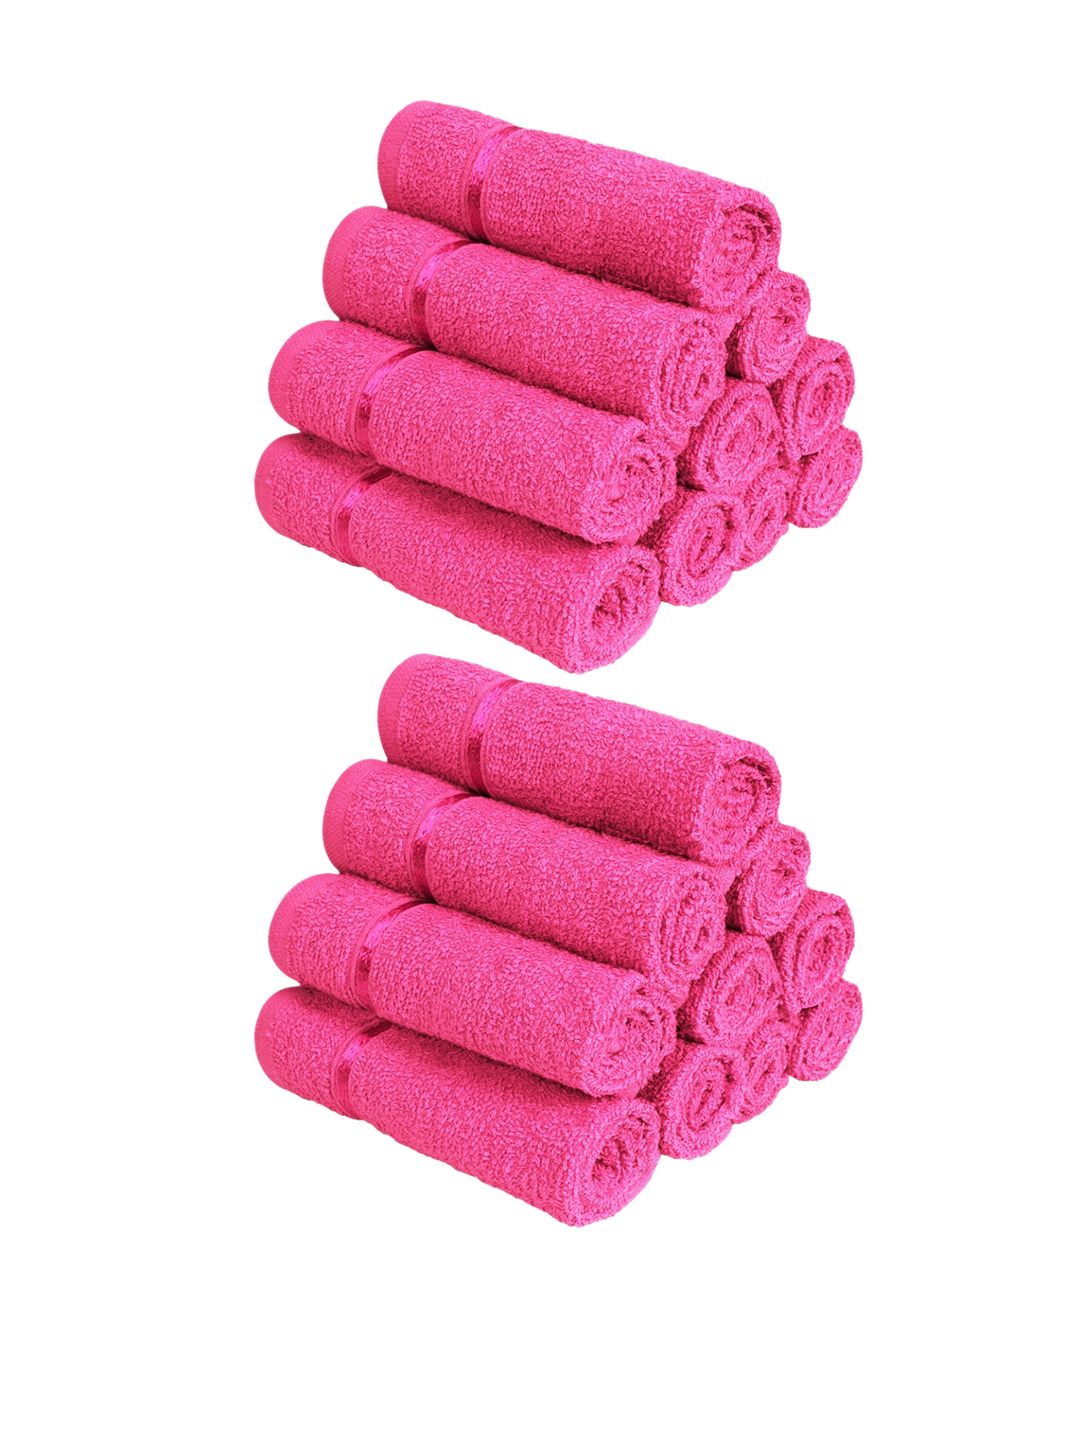 Story@home Set Of 20 Pink Solid 450 GSM Pure Cotton Face Towels Price in India